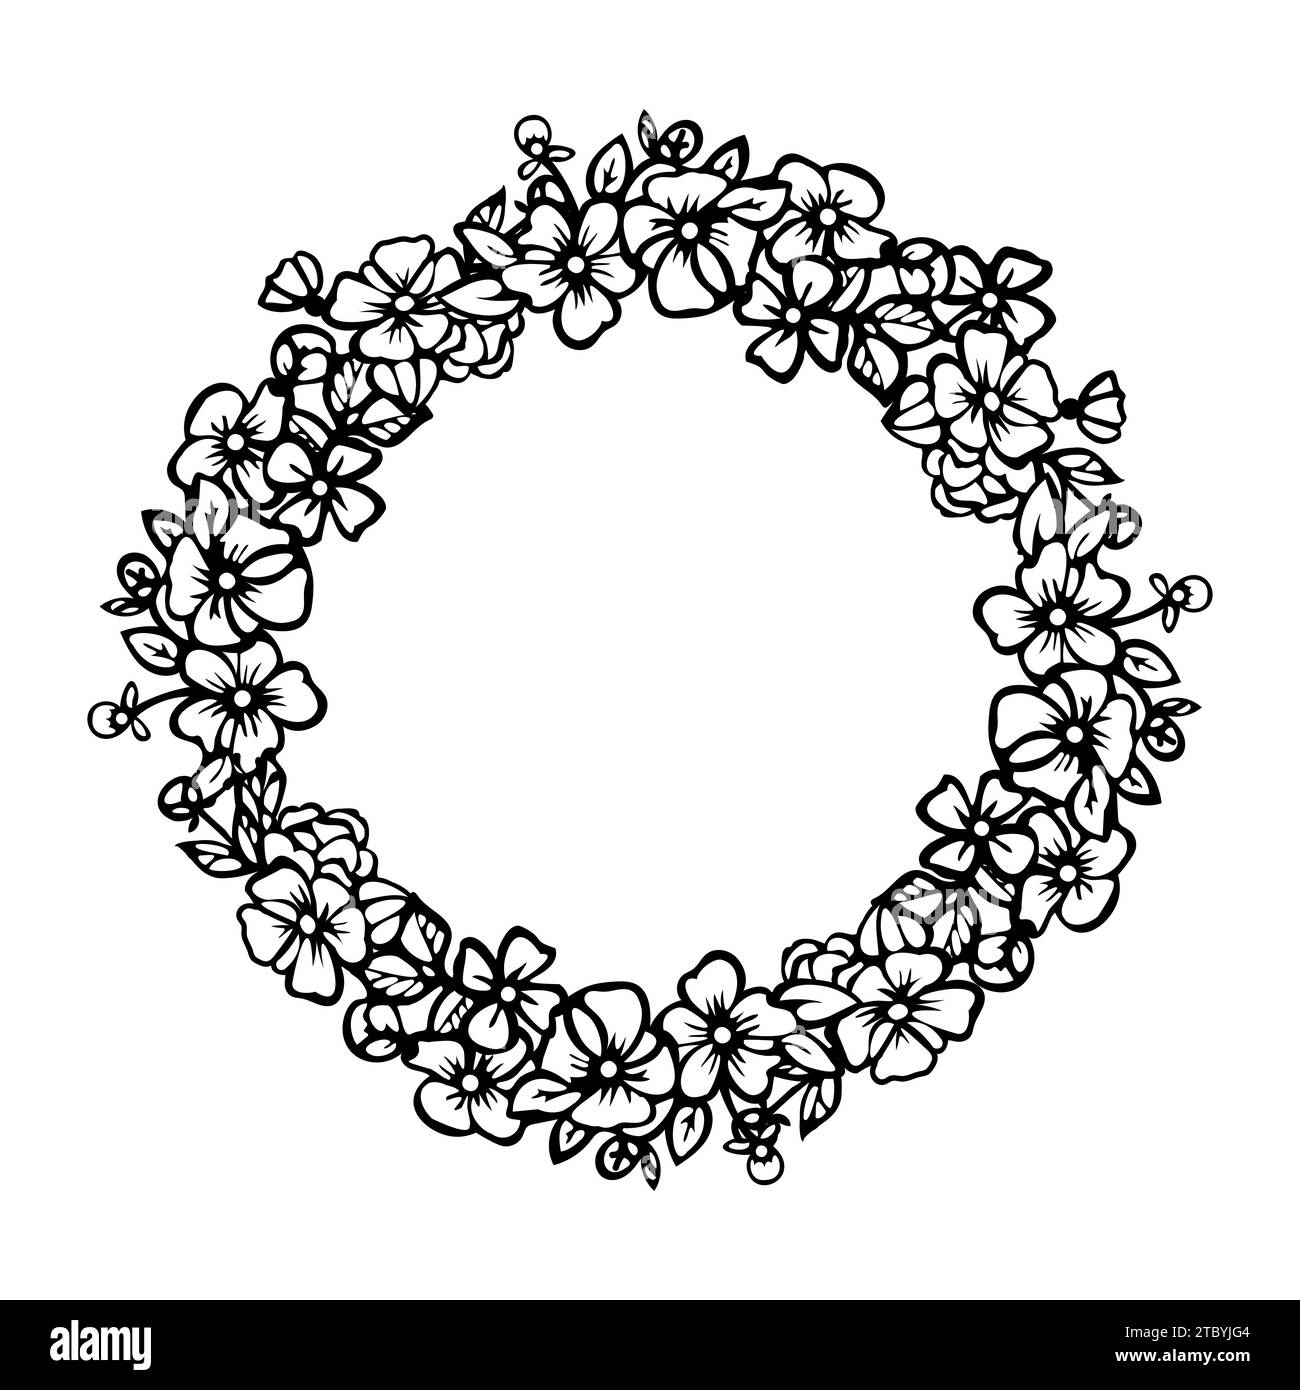 Floral circle wreath with garden flowers. Abstract design of leaves and flowers. Design of blossom and leaves made for card, invite, scrapbook, clip a Stock Vector